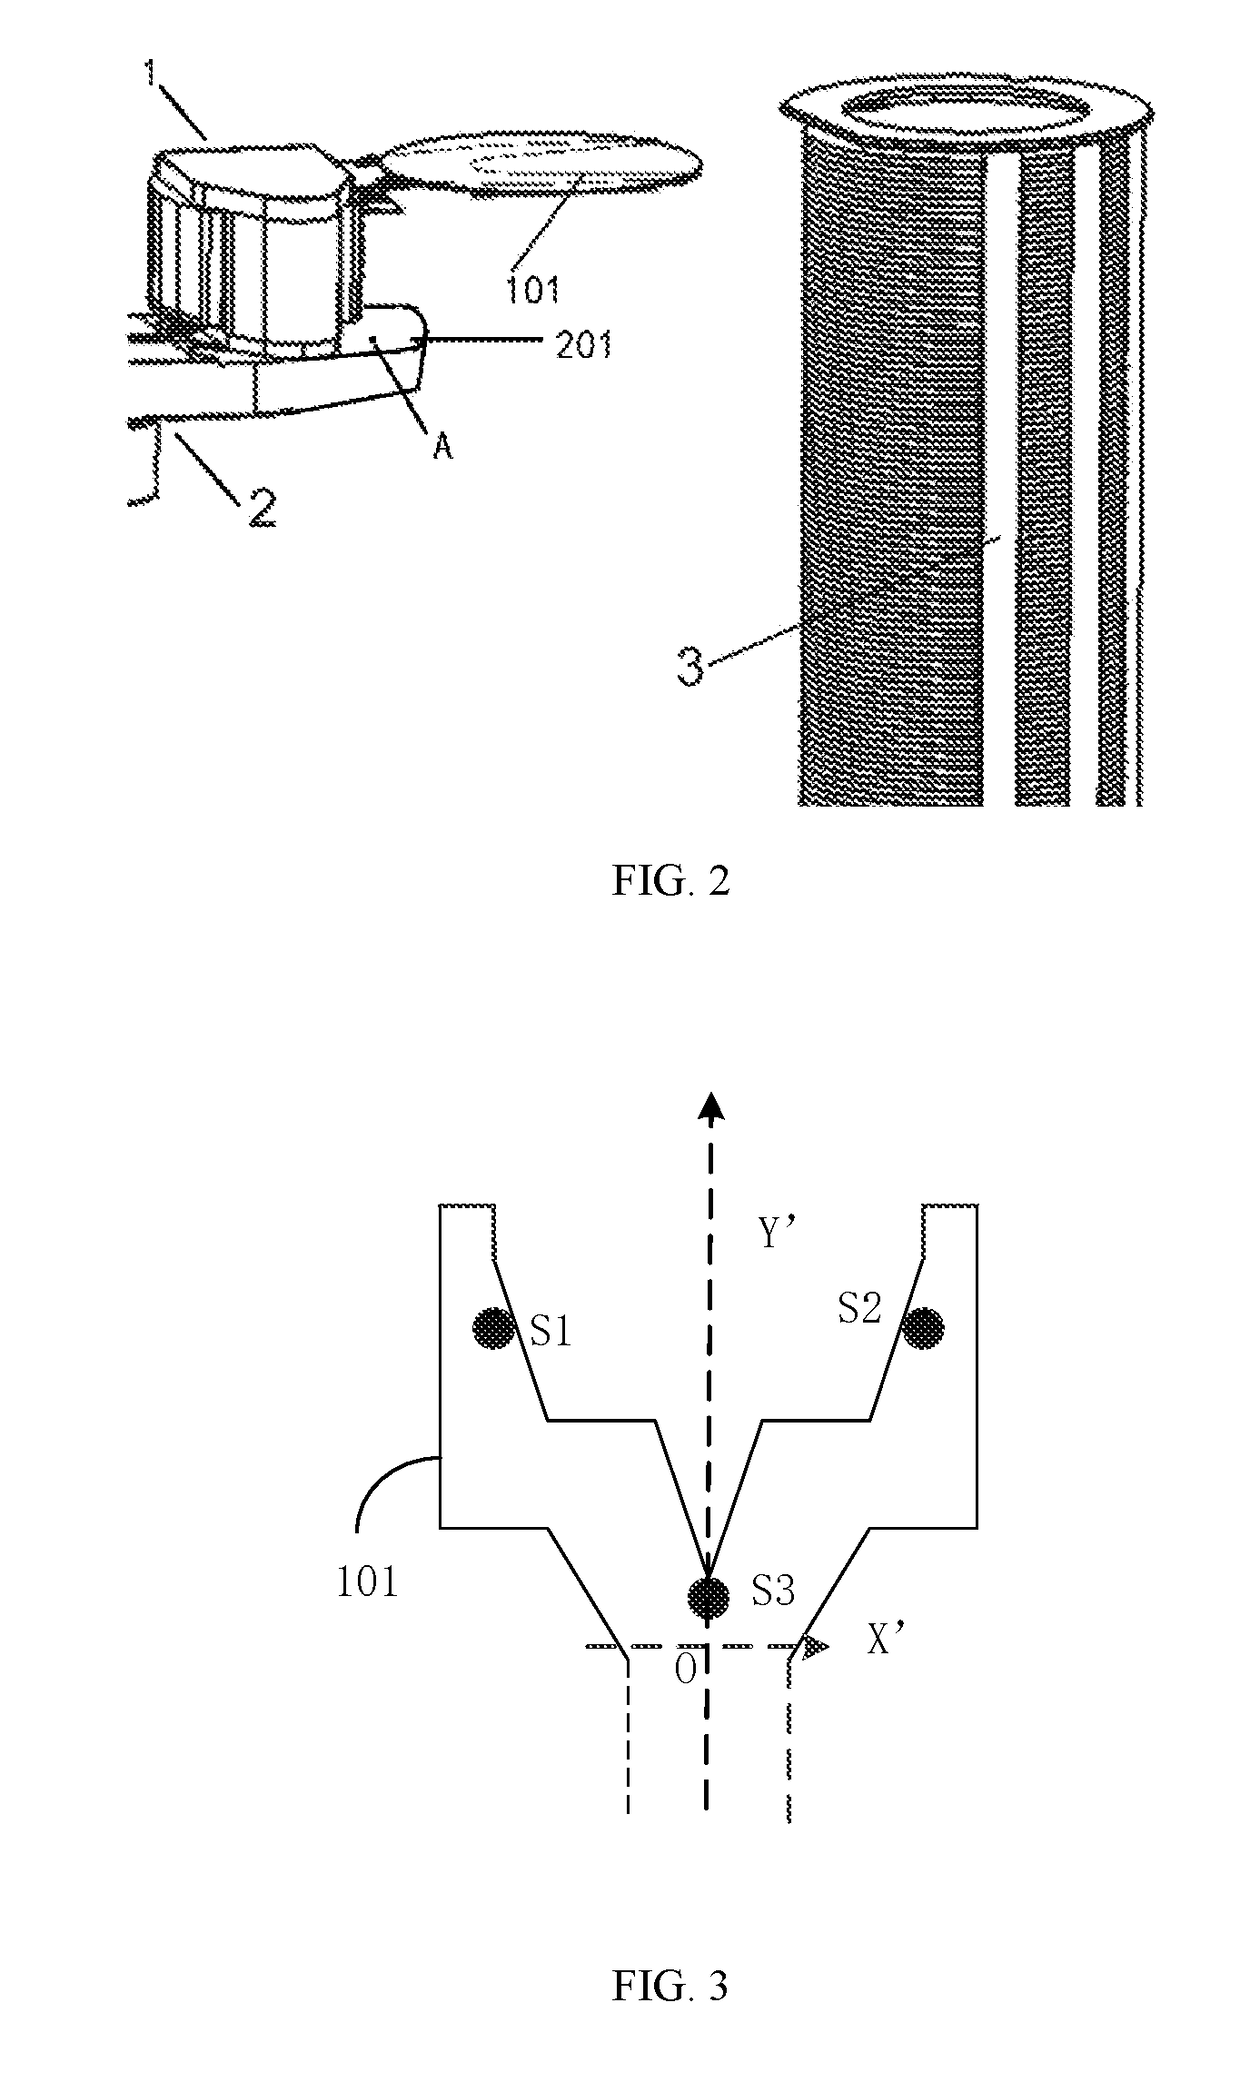 Method and system of robot fork calibration and wafer pick-and-place